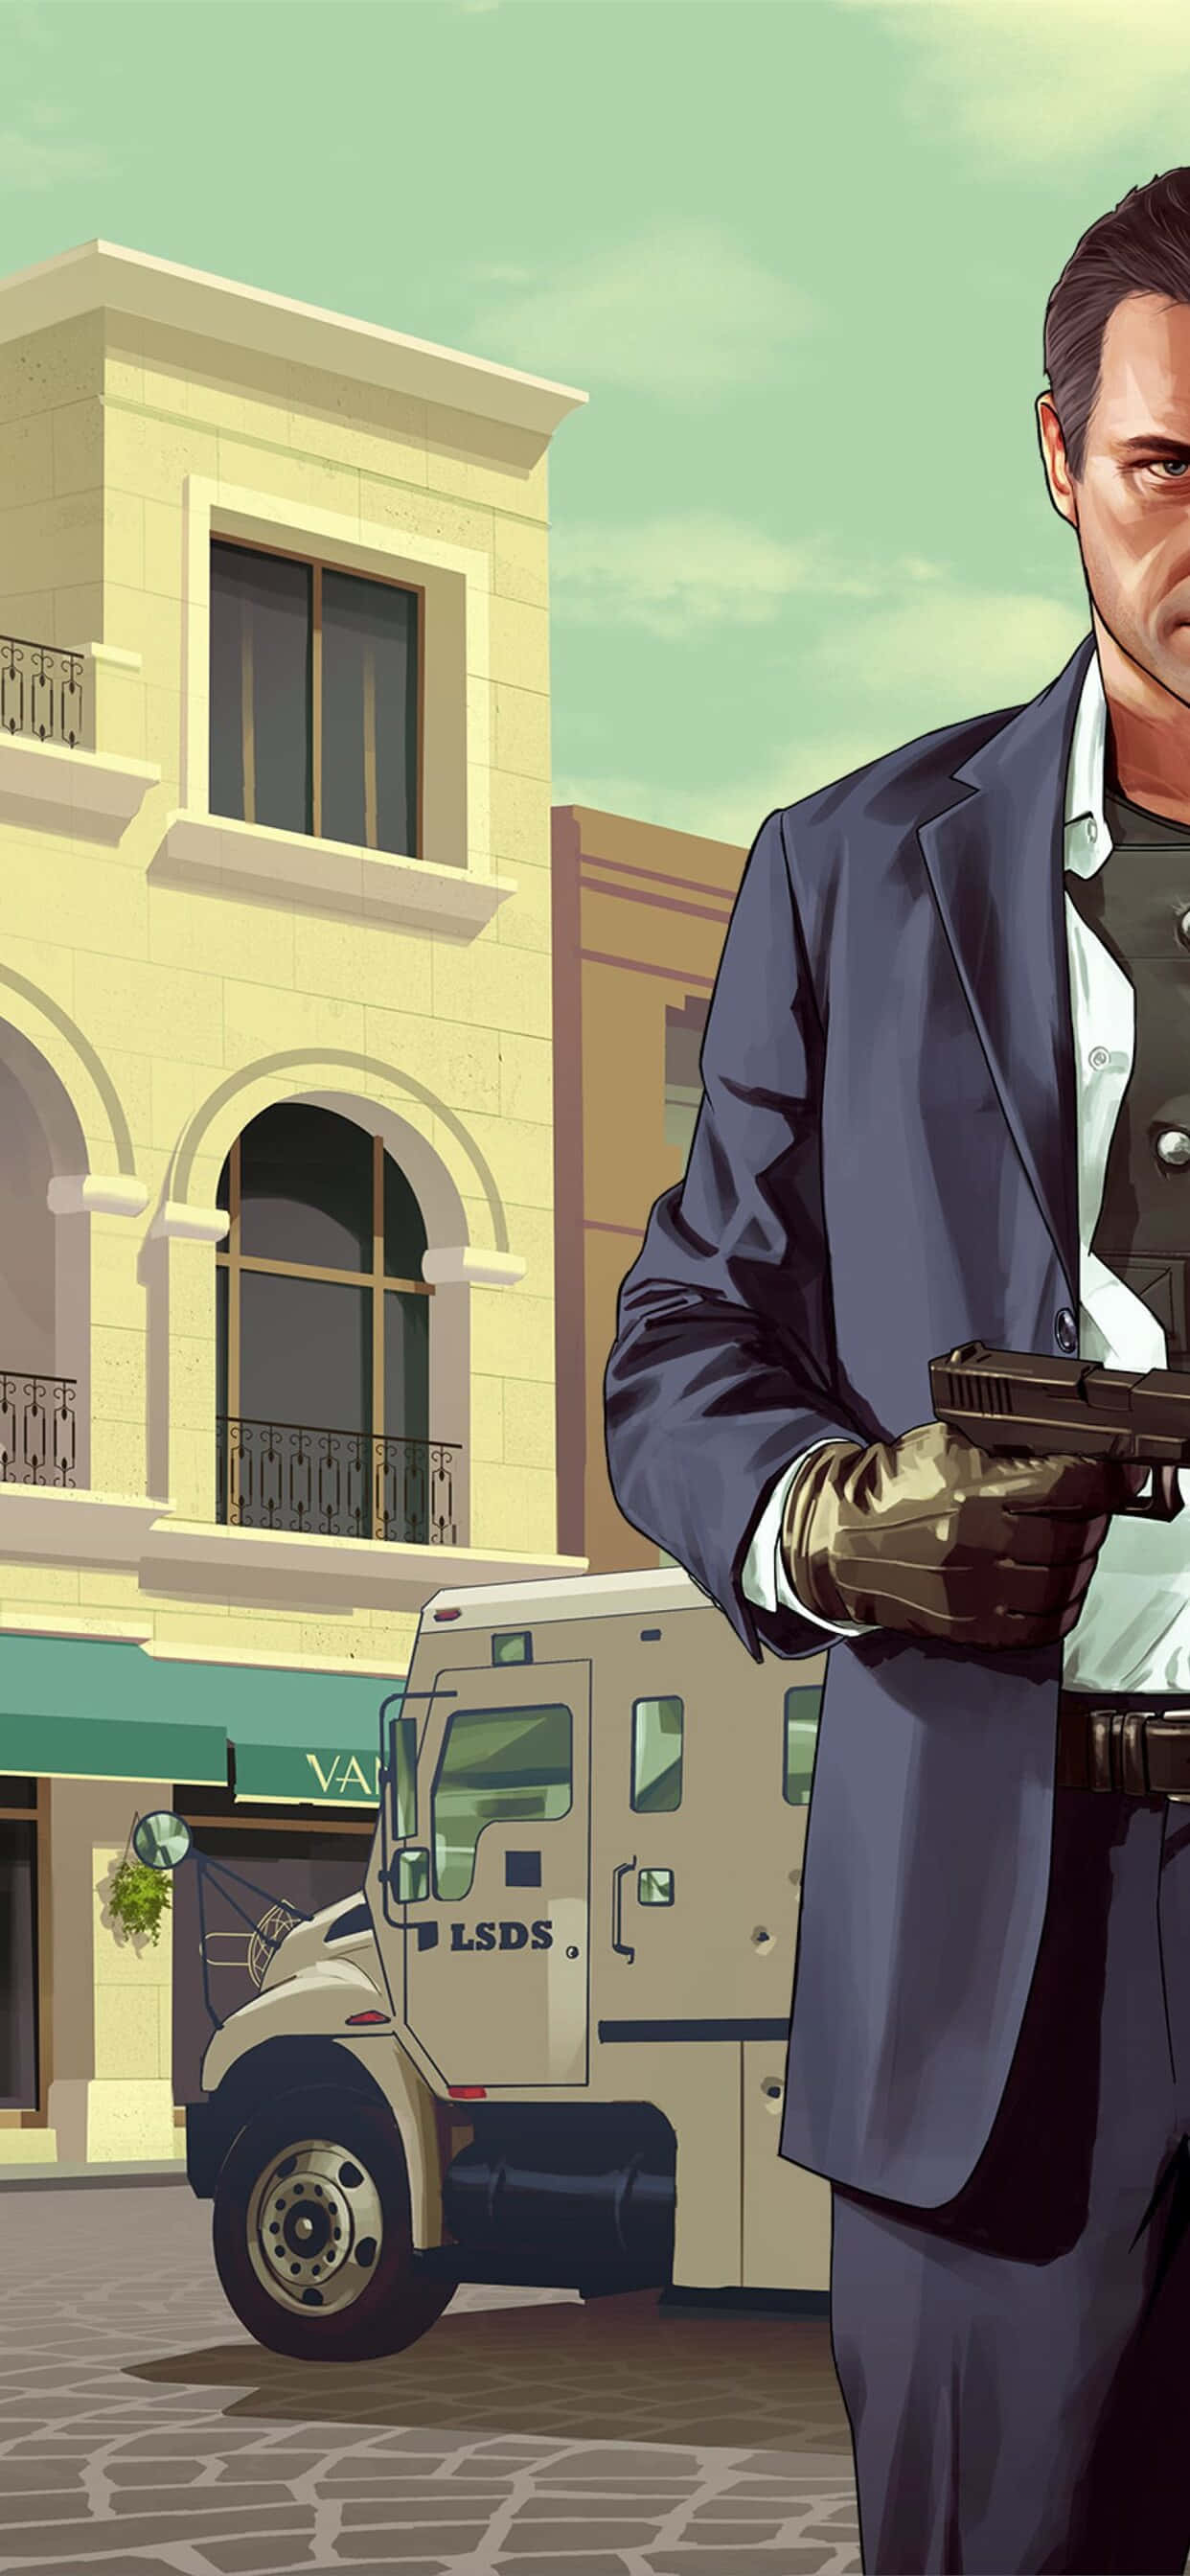 Iphone Xs Max Grand Theft Auto V Background Robber In Suit